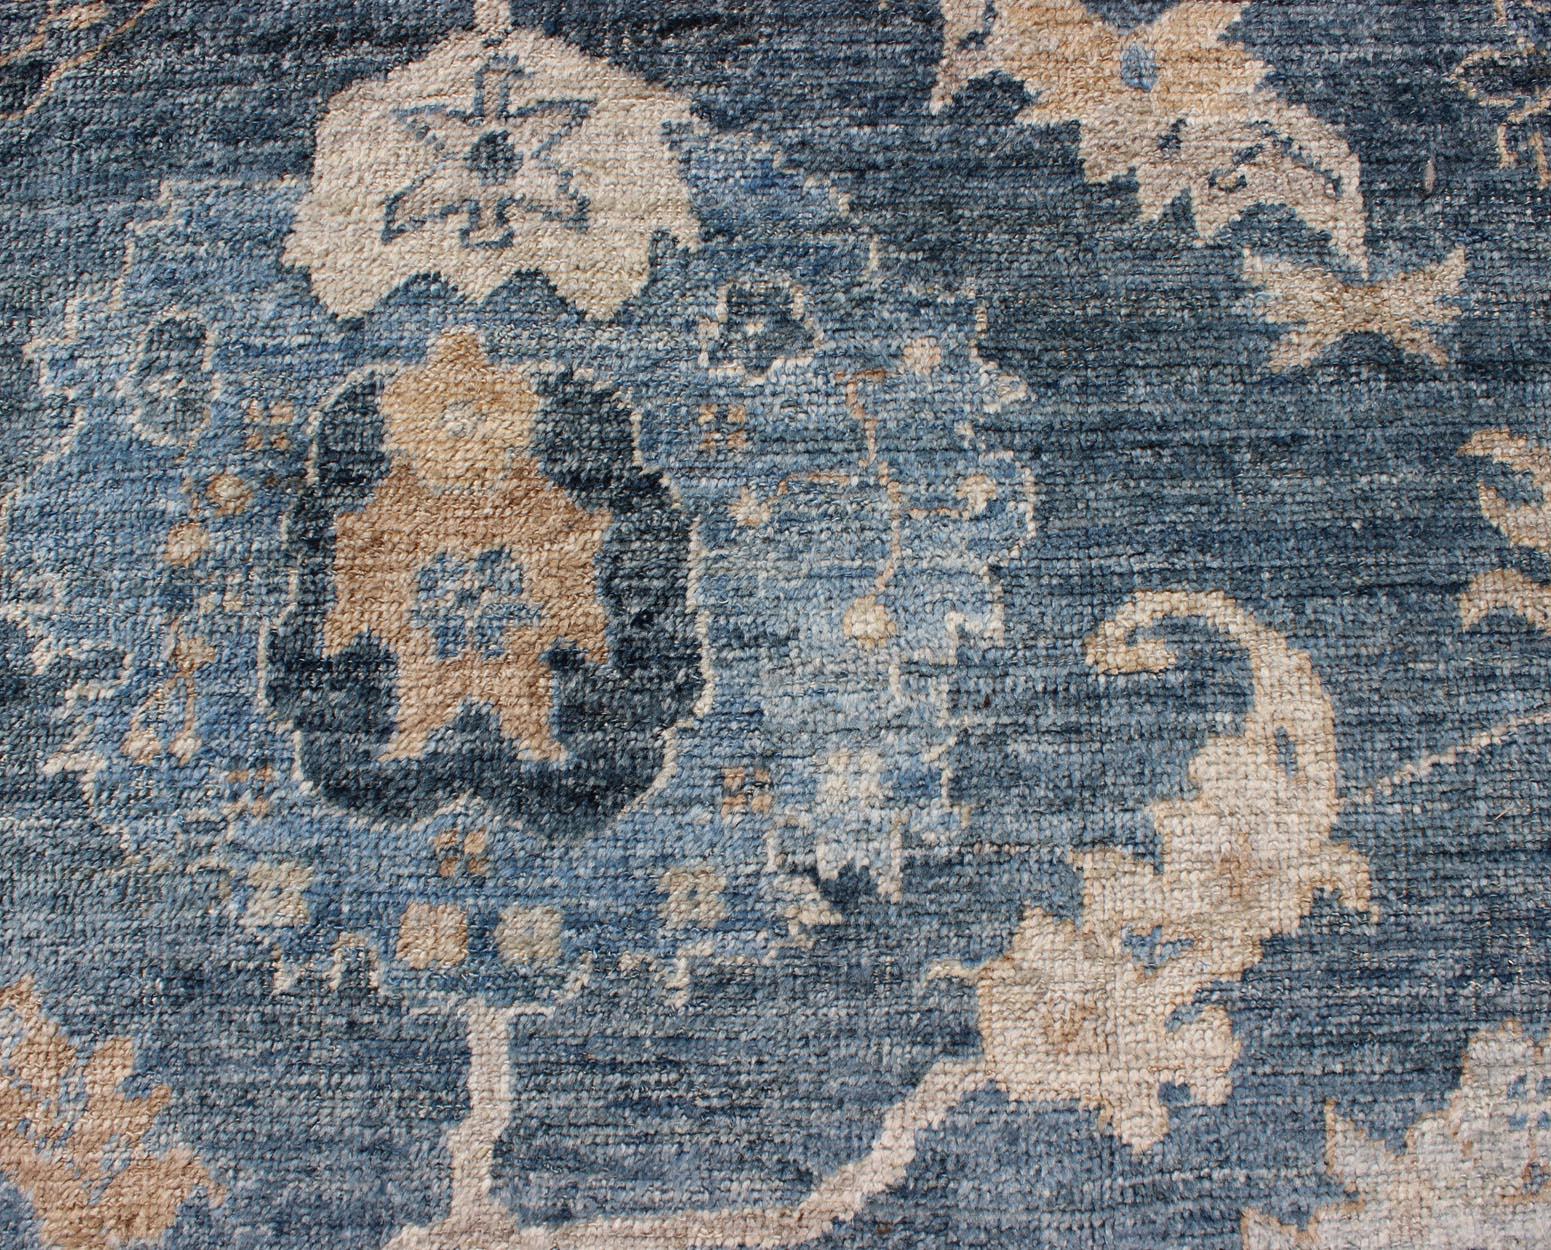 Angora Turkish Oushak Rug in Shades of Blue and Tan 3